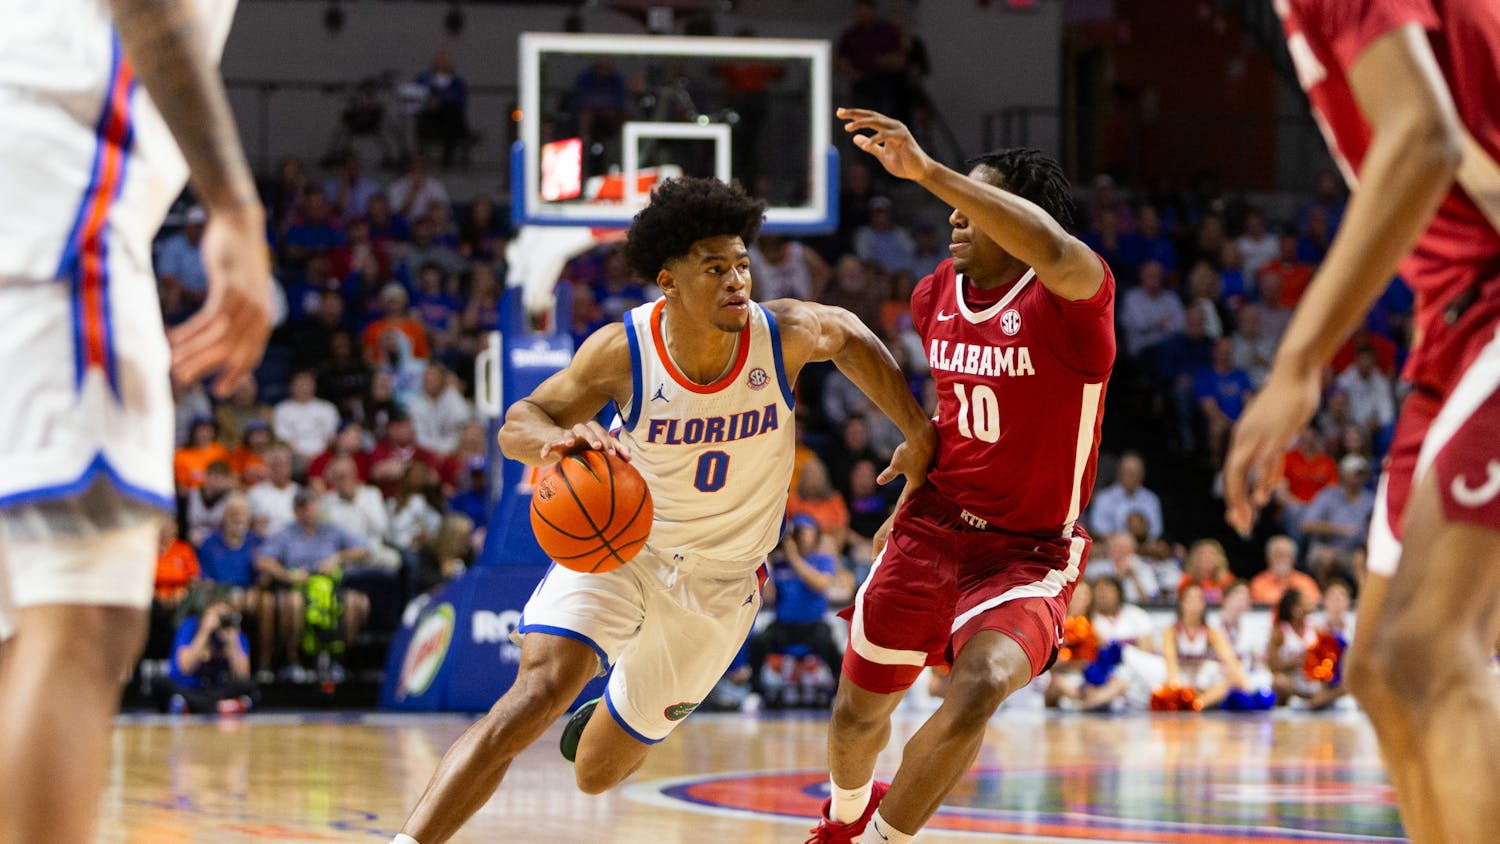 Gators men's basketball graduate student guard Zyon Pullin drives to the basket during the Florida Gators men's basketball game against the Alabama Crimson Tide on Tuesday, March 5, 2024. Photo by Ryan Friedenberg